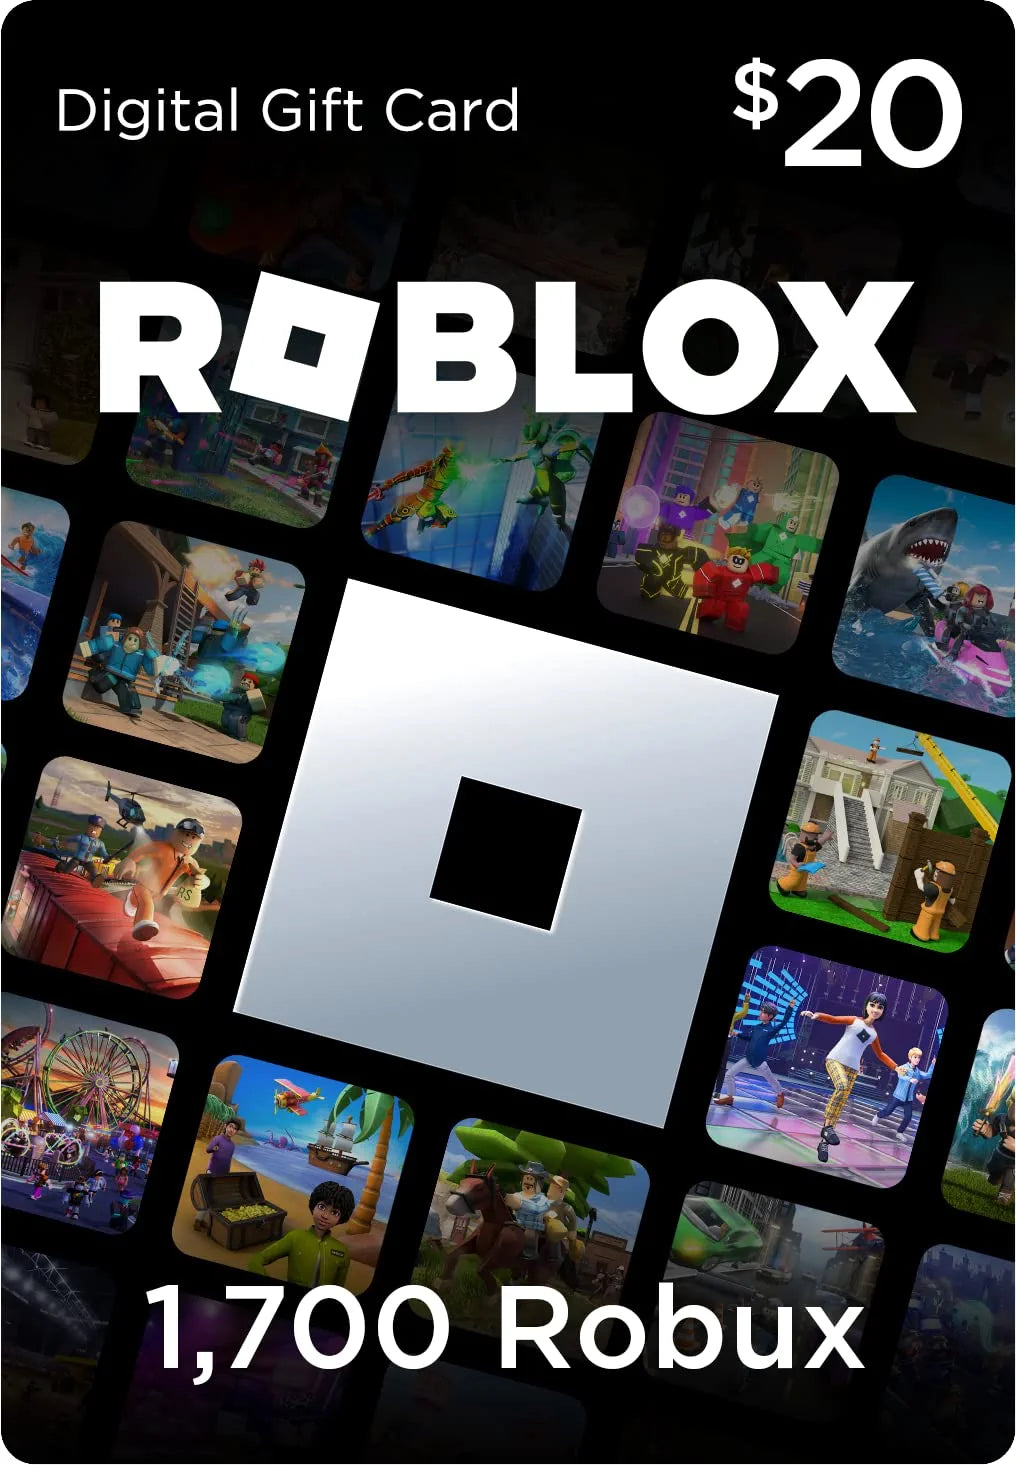 Roblox Gift Card - 1000 Robux - Digital Code Instant delivery region free.  - Roblox Gift Cards - Gameflip